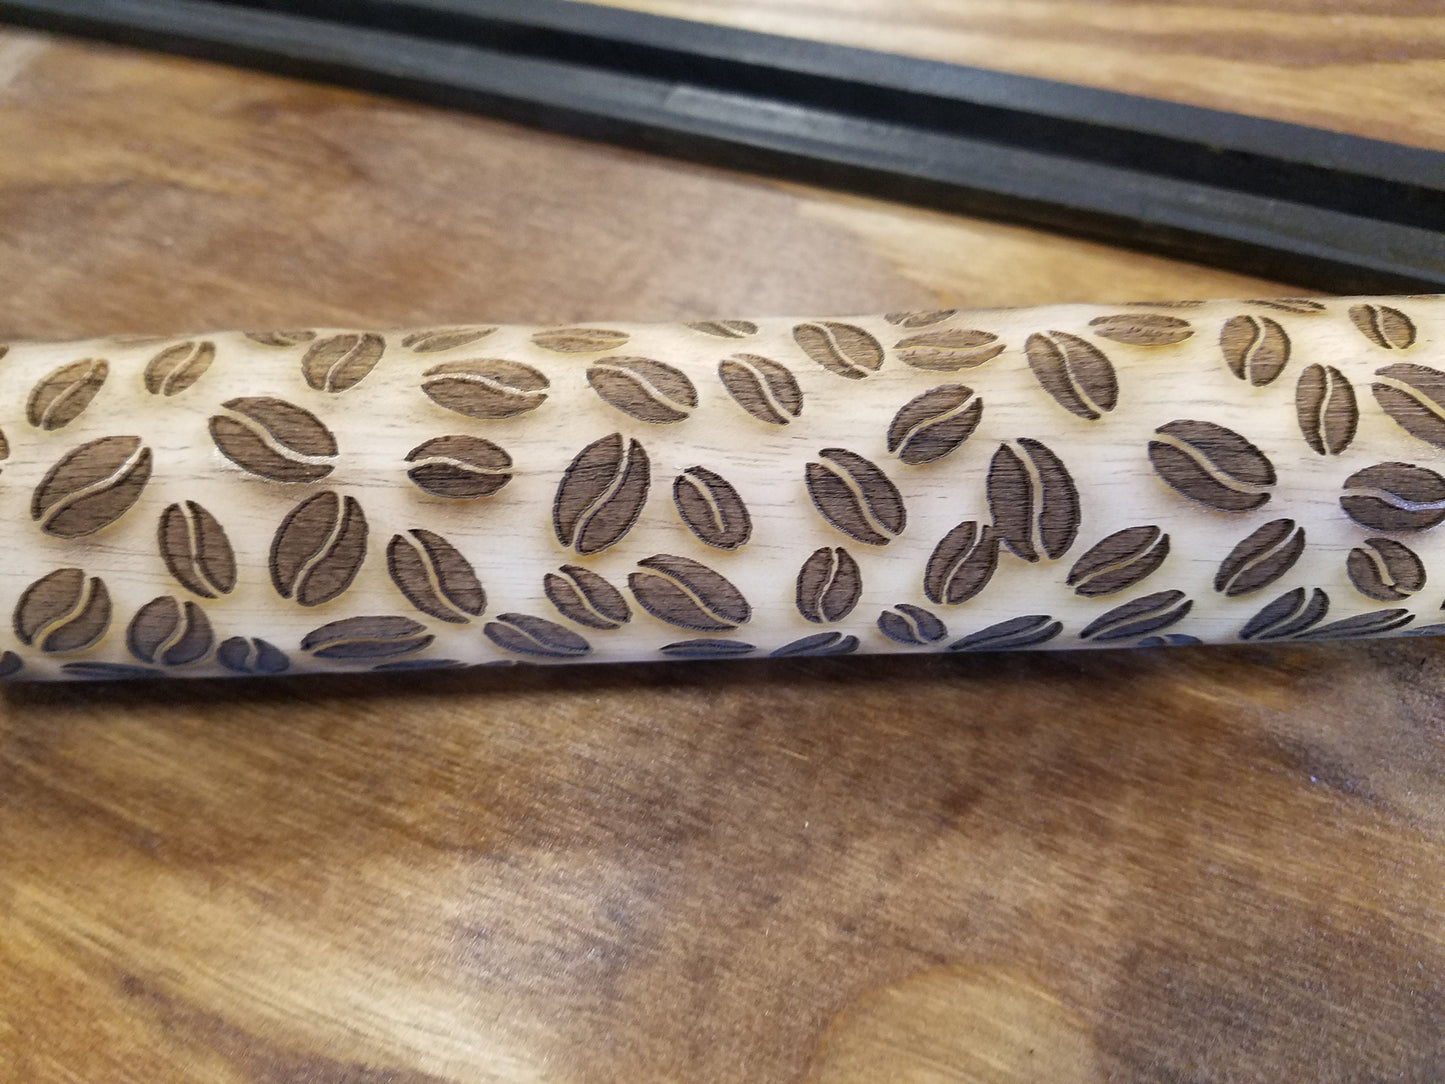 Coffee Bean, Gift, Embossed, Engraved, Wooden Rolling Pin, Pottery Press, Cookie Stamp, Laser, Hardwood, Pattern, 10 inch, Texture textured